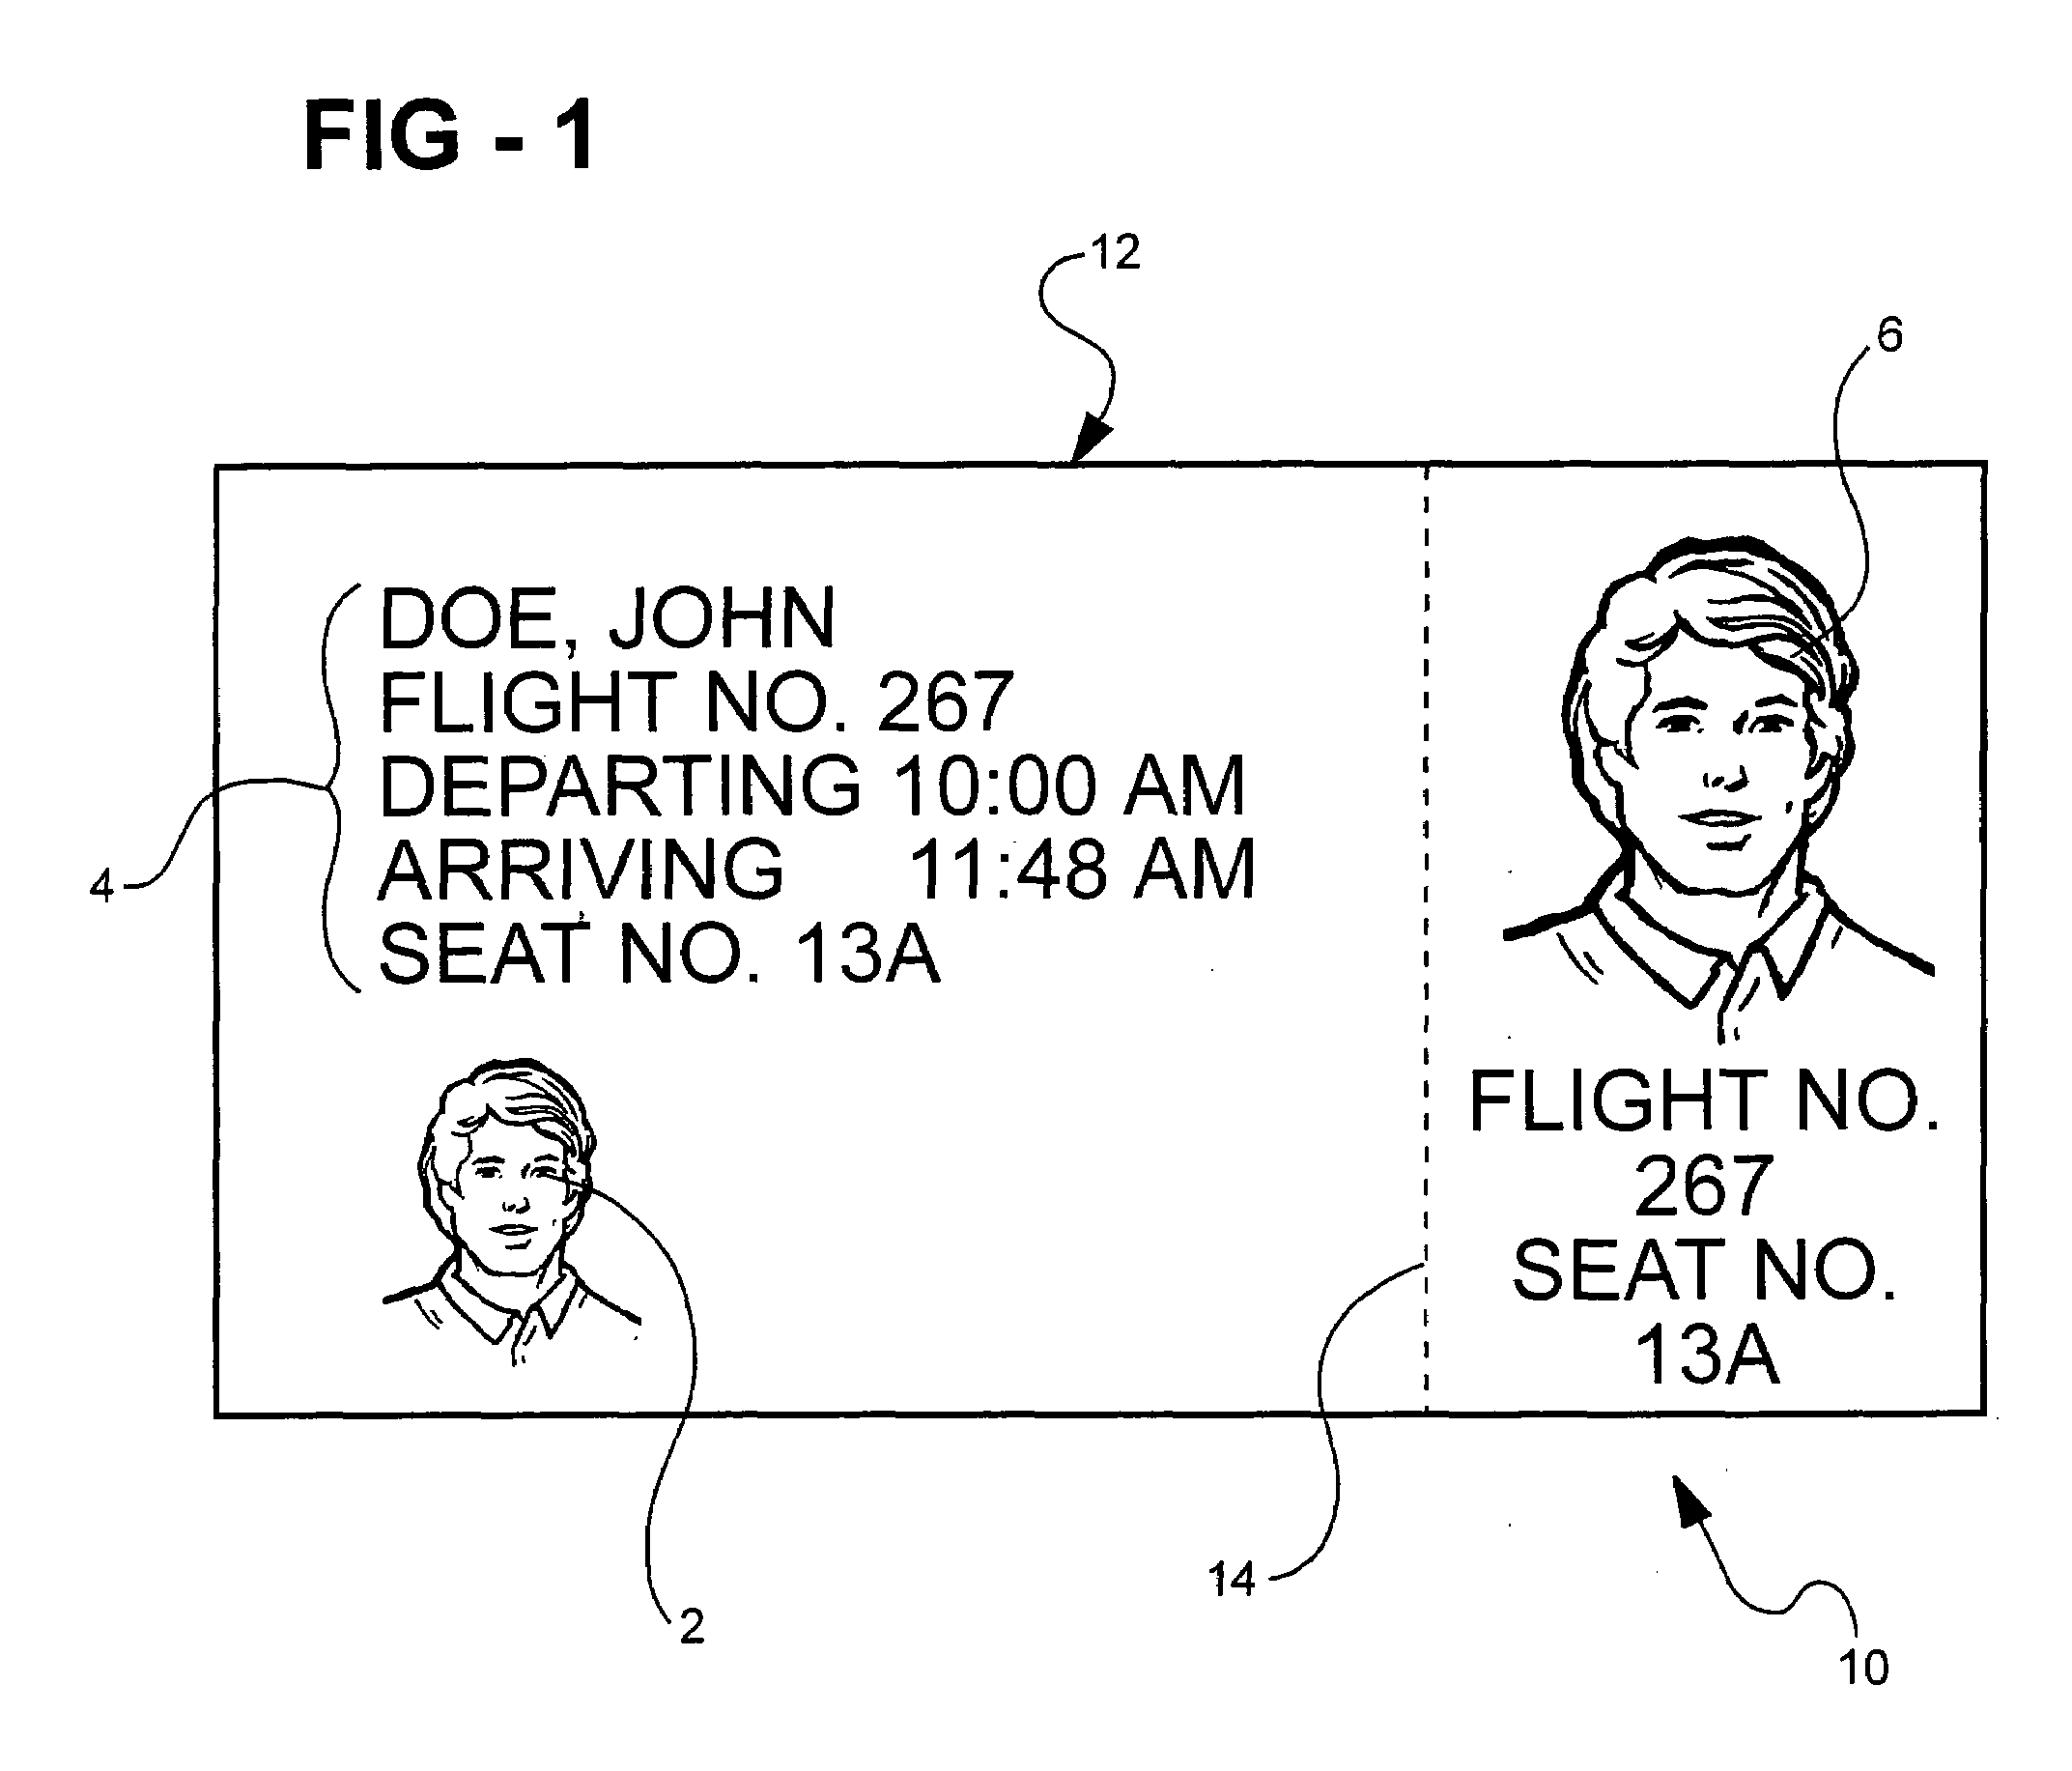 Method for verifying the identity of a passenger